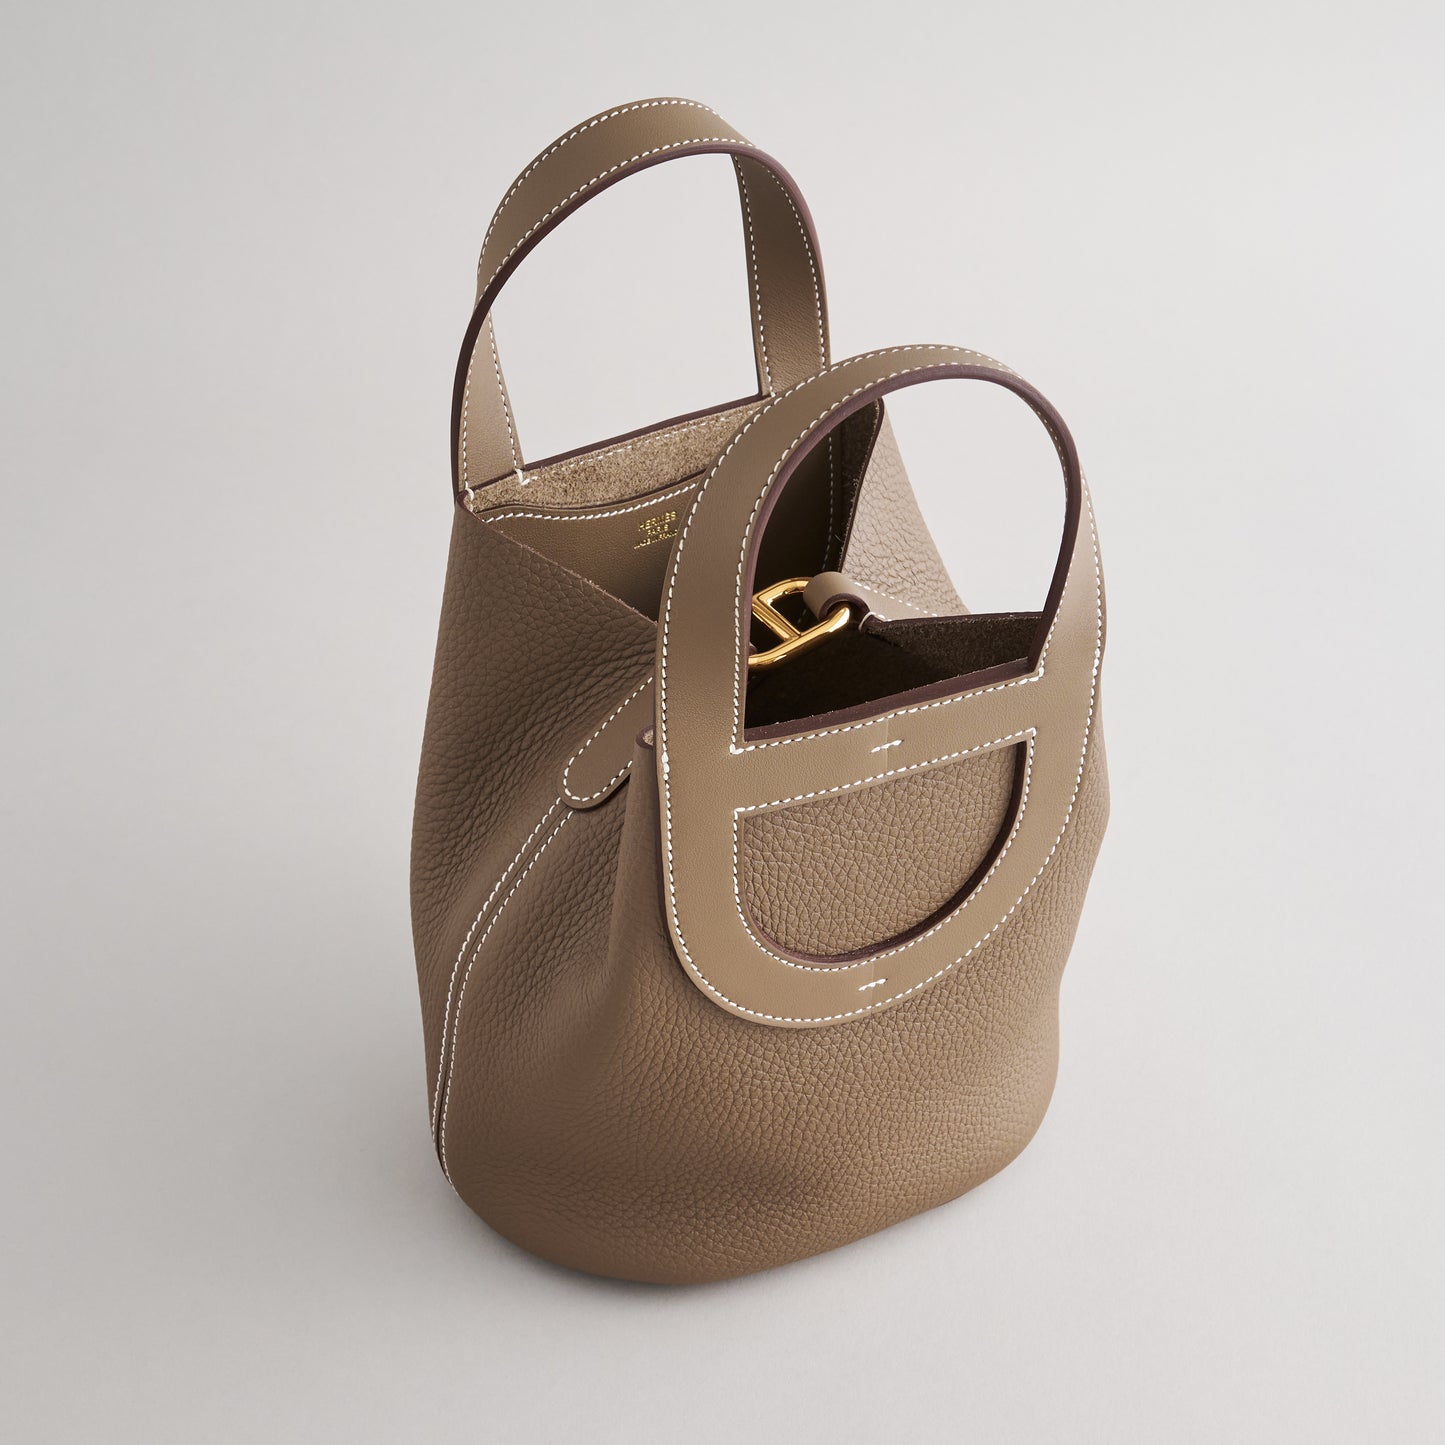 Hermès In-The-Loop Bag 18 Clemence, Swift Etoupe Gold Hardware